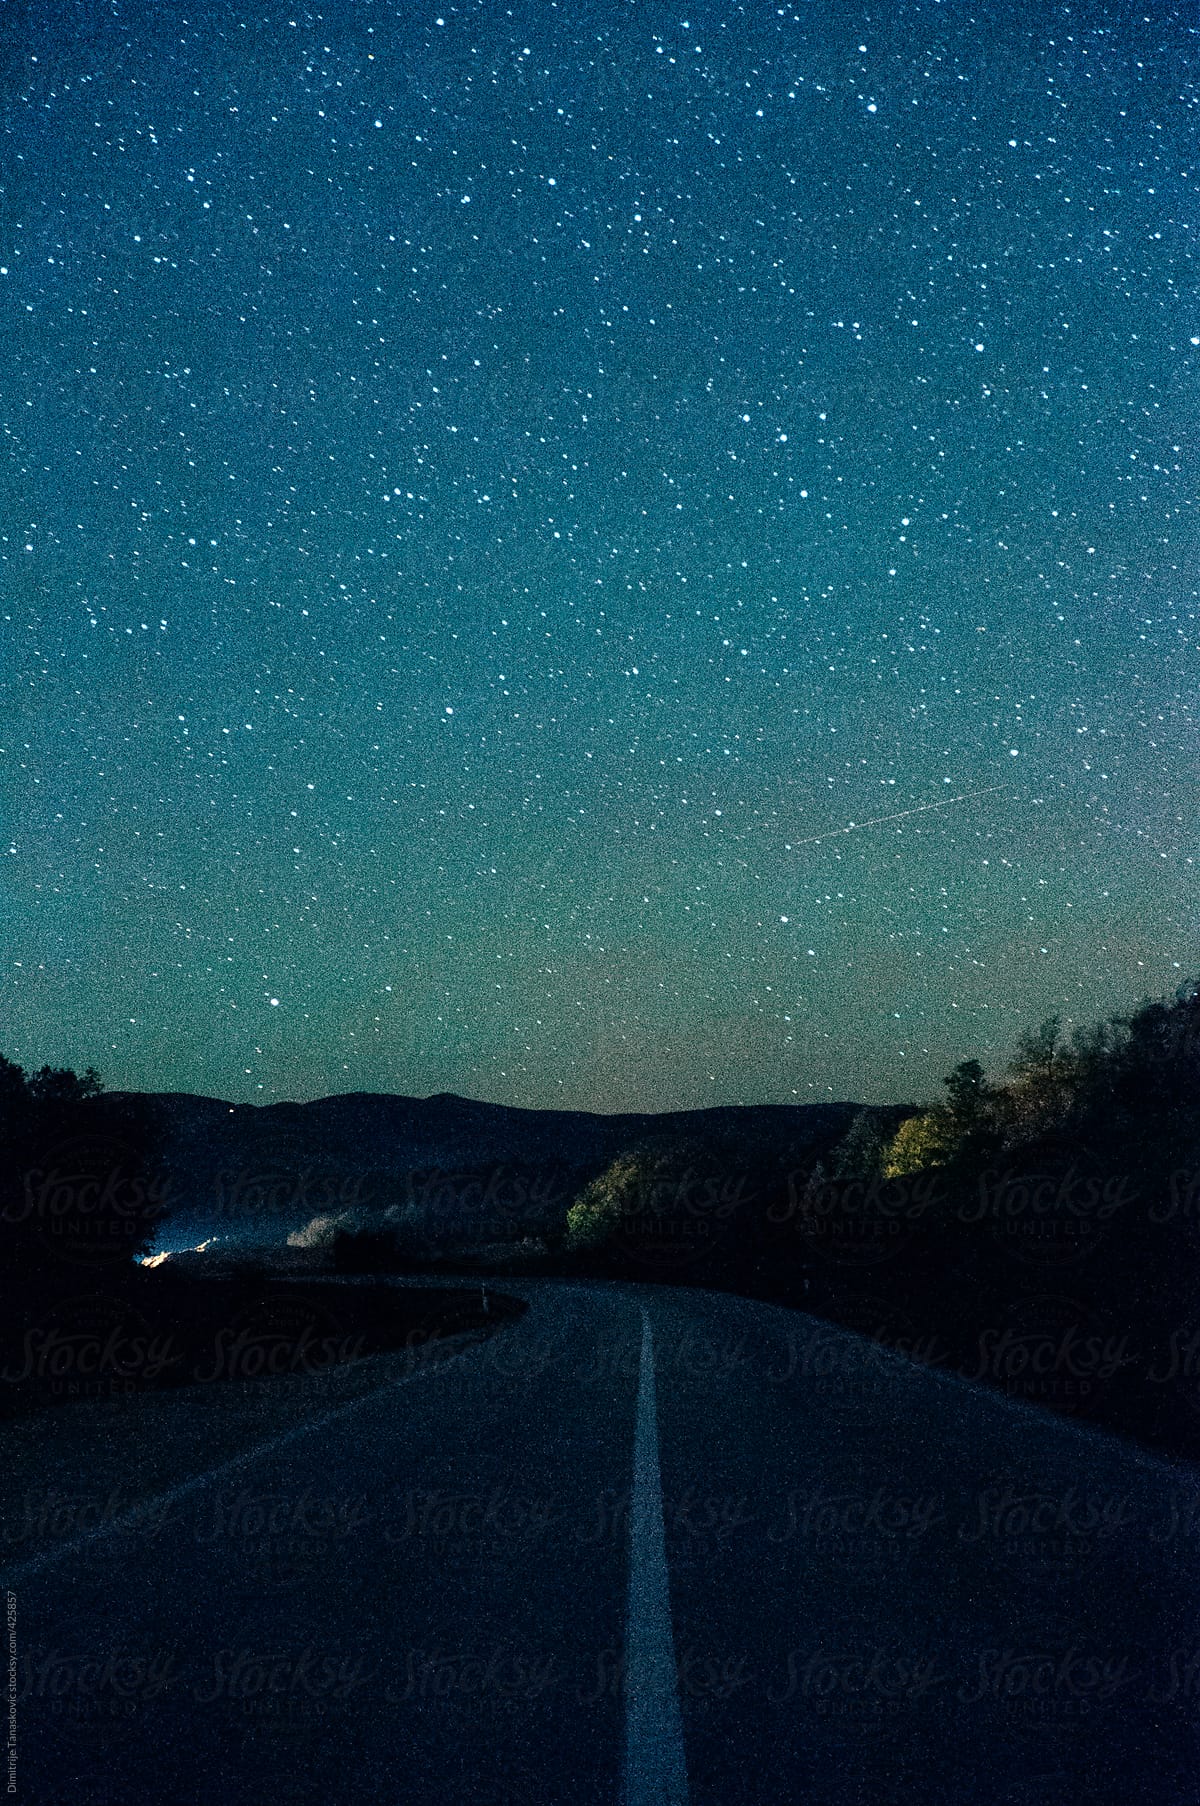 Stary sky above the road with car approaching in distance